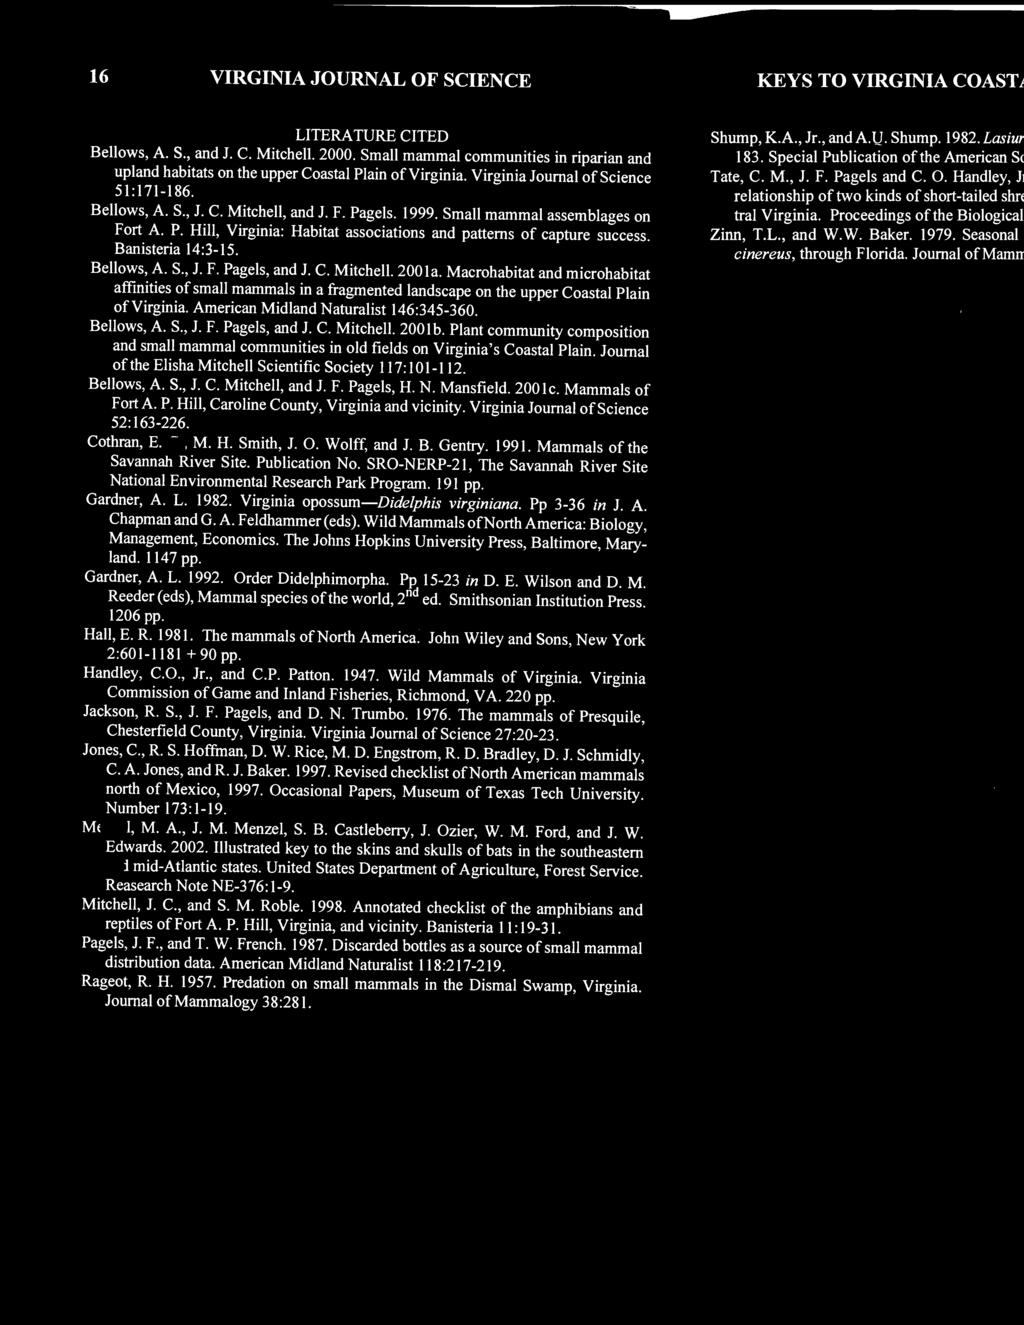 Journal of the Elisha Mitchell Scientific Society 117: 101-112. Bellows, A. S., J.C. Mitchell, and J. F. Pagels, H. N. Mansfield. 2001c. Mammals of Fort A. P. Hill, Caroline County, Virginia and vicinity.